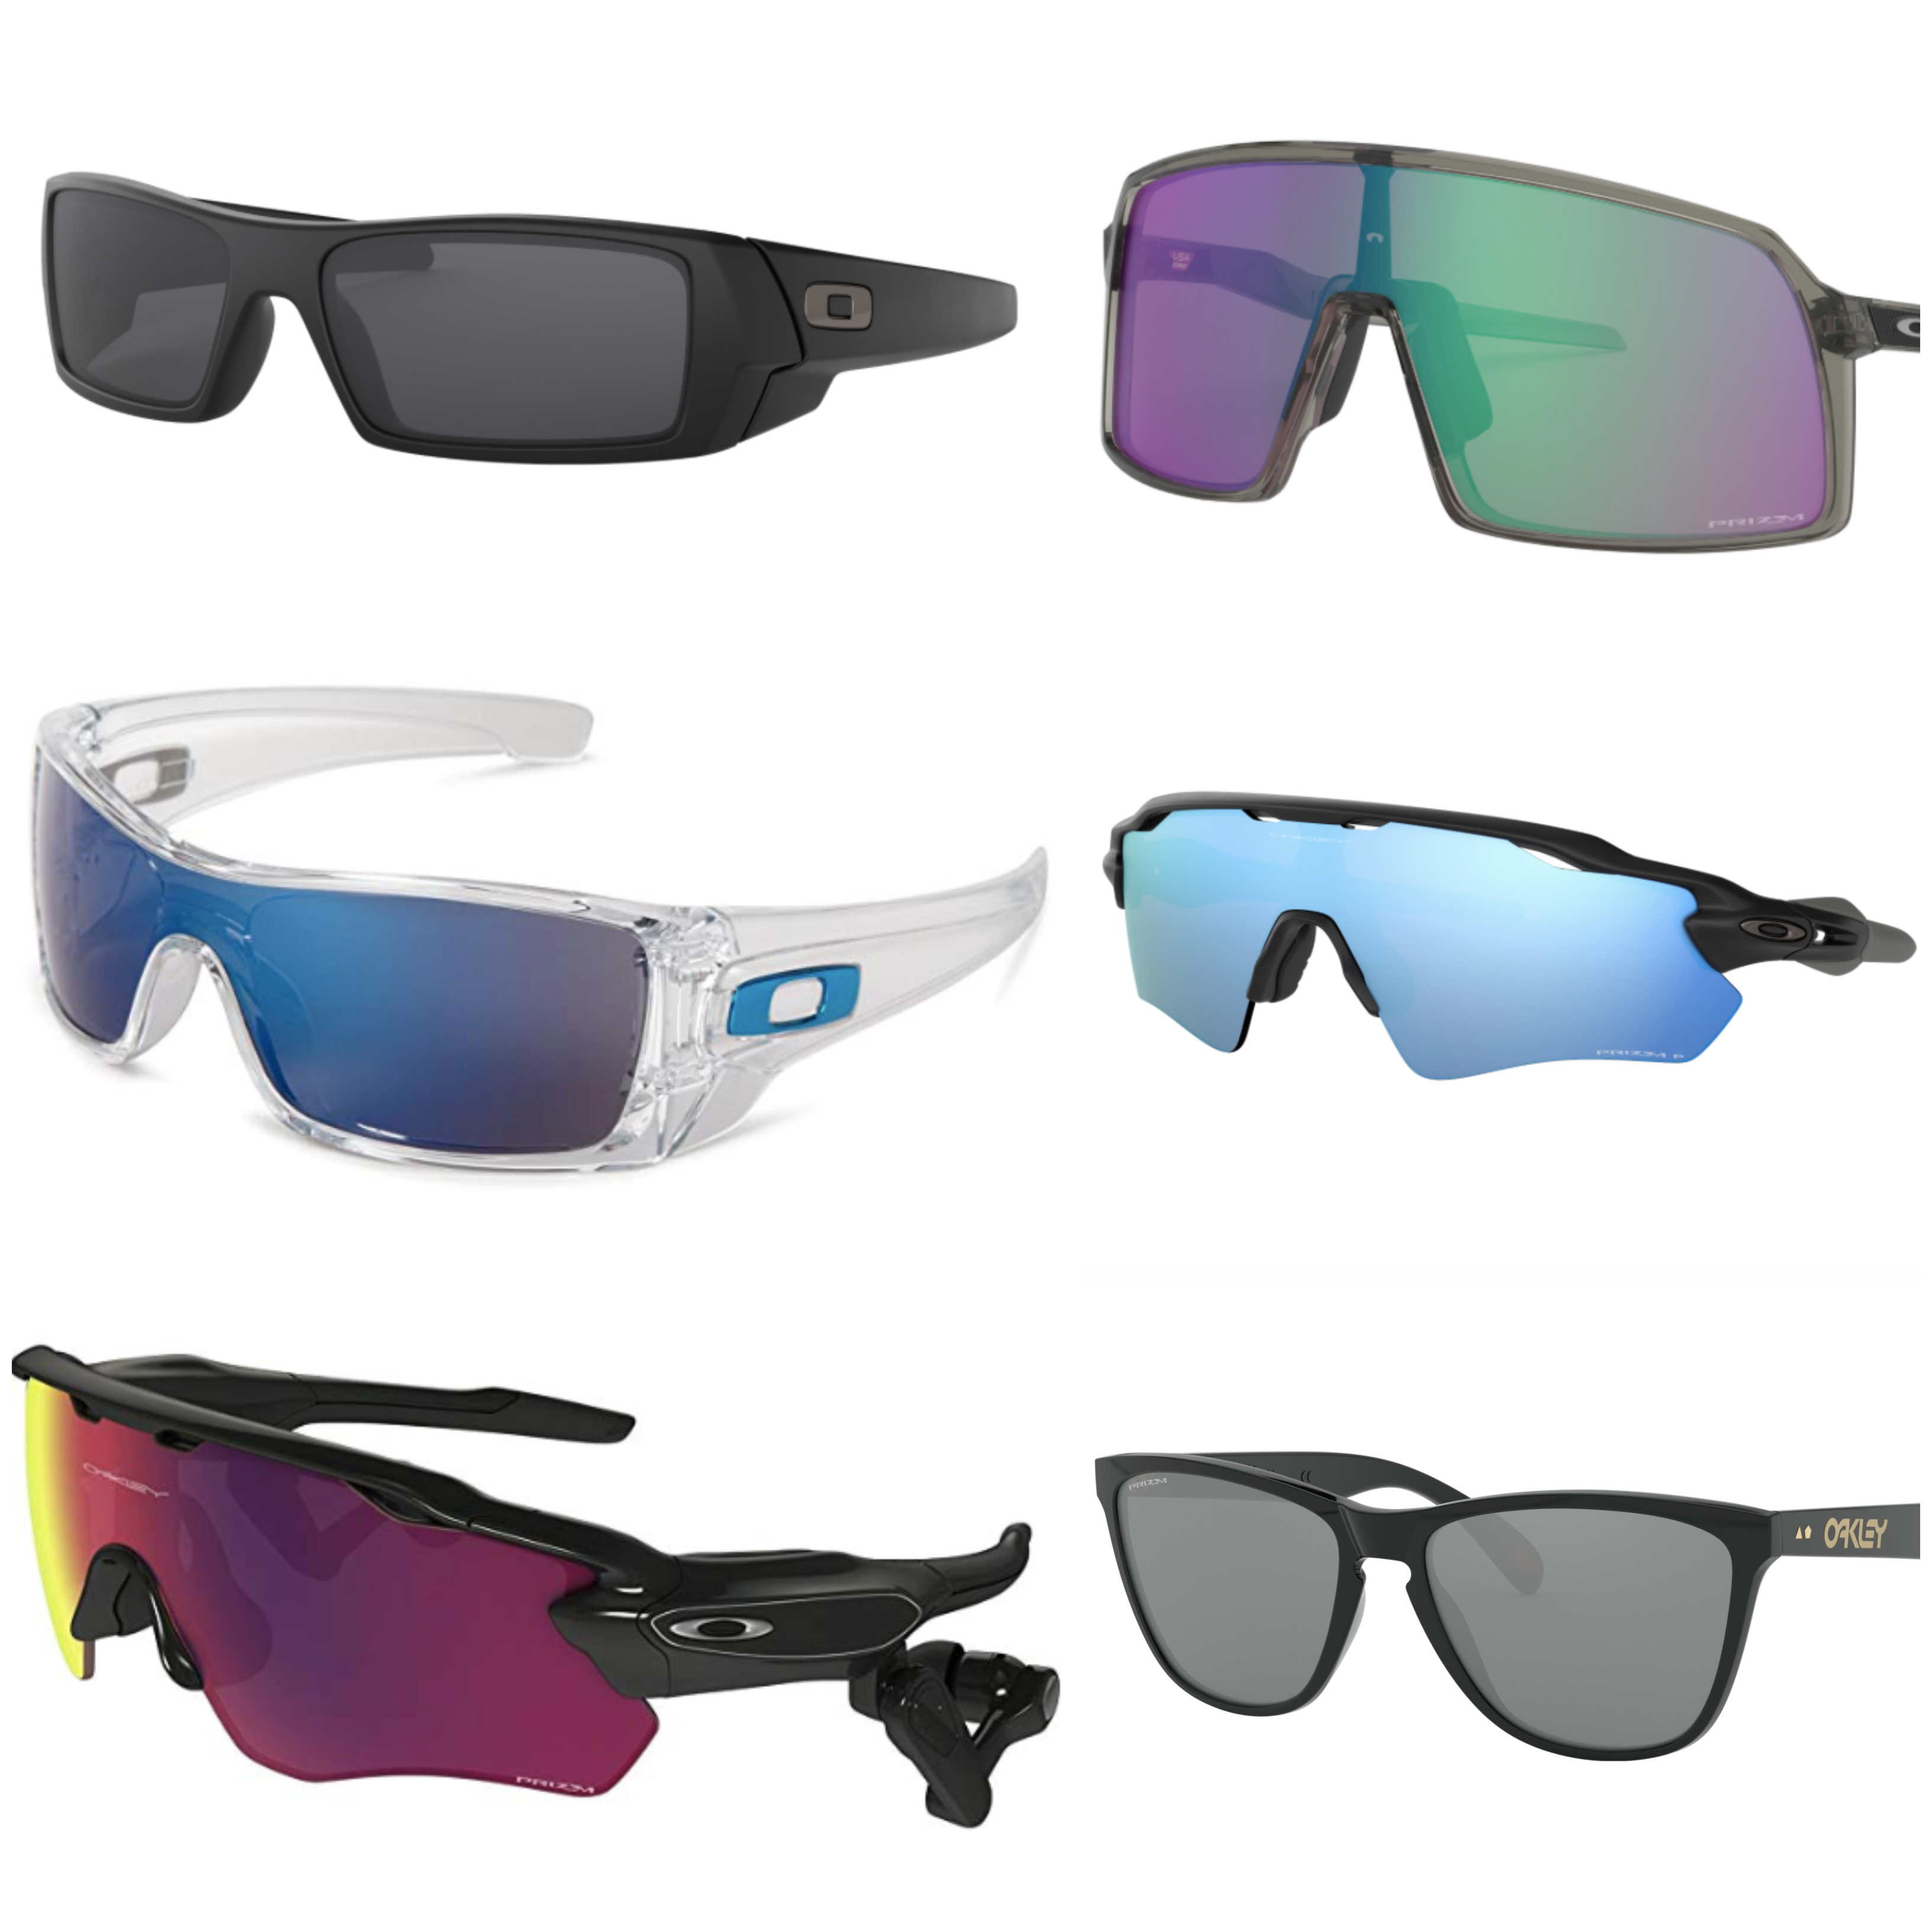 Oakley Sunglasses Has A Killer Deal Offering 30 Off EVERY Style Right